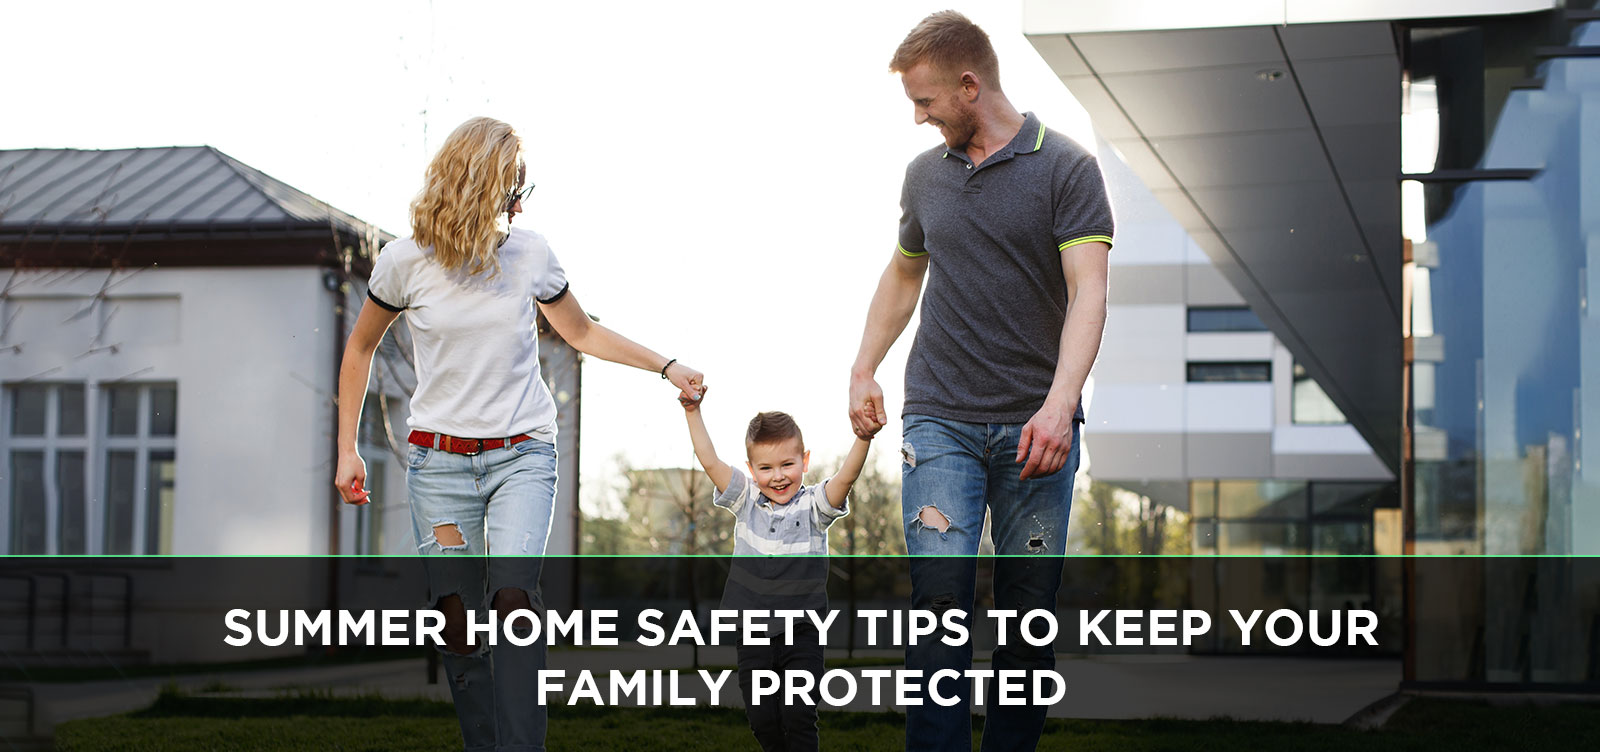 Summer Home Safety Tips